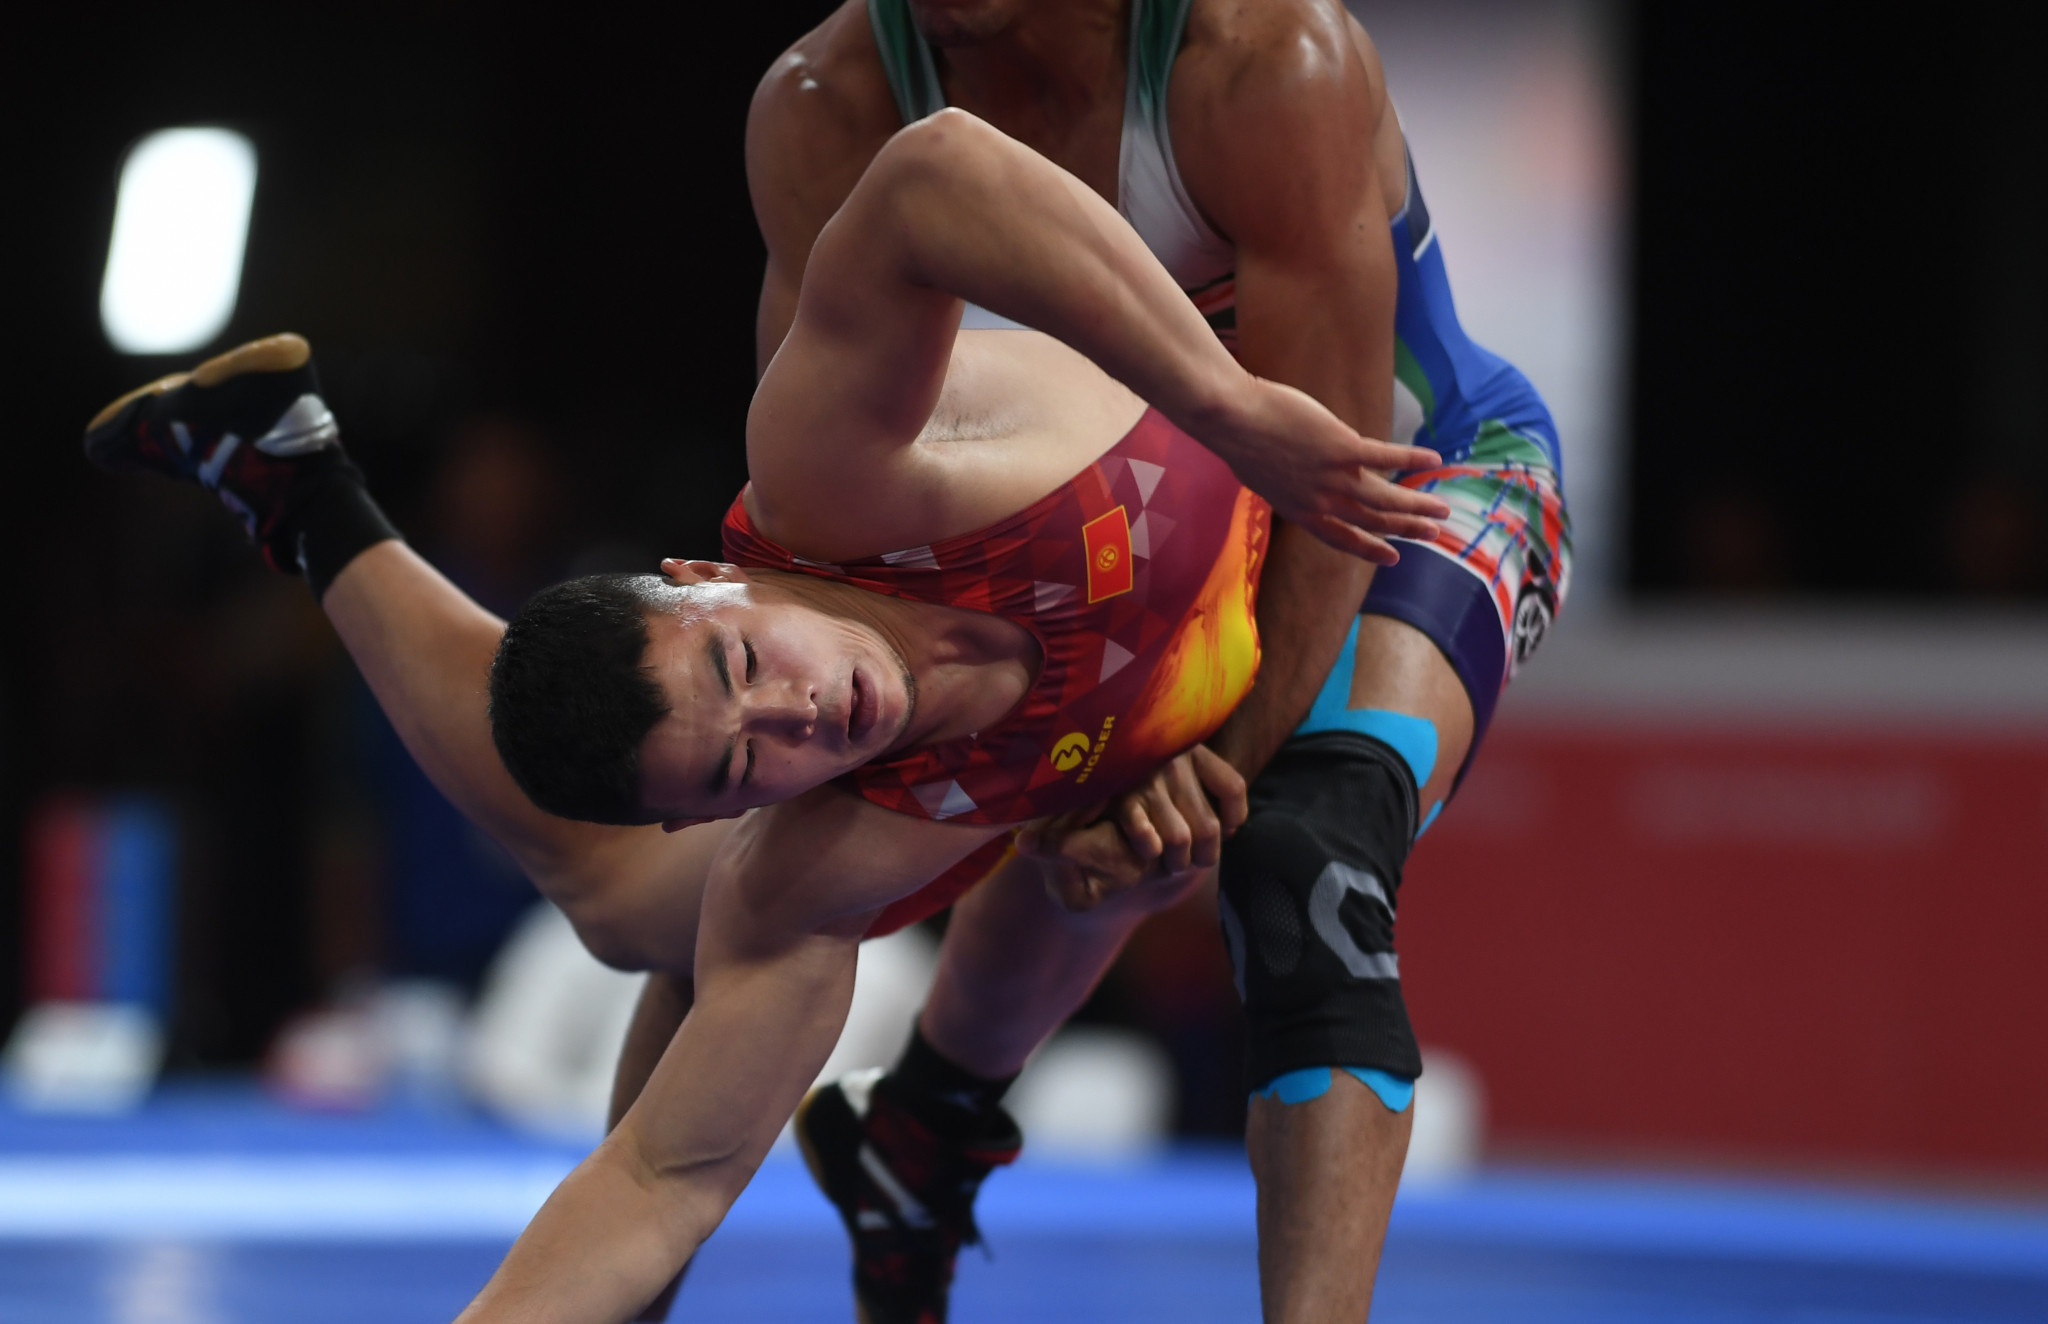 Russian and Belarussian athletes will not be able to compete in combat sports, like wrestling, if they are allowed to take part in this year's Asian Games ©Getty Images